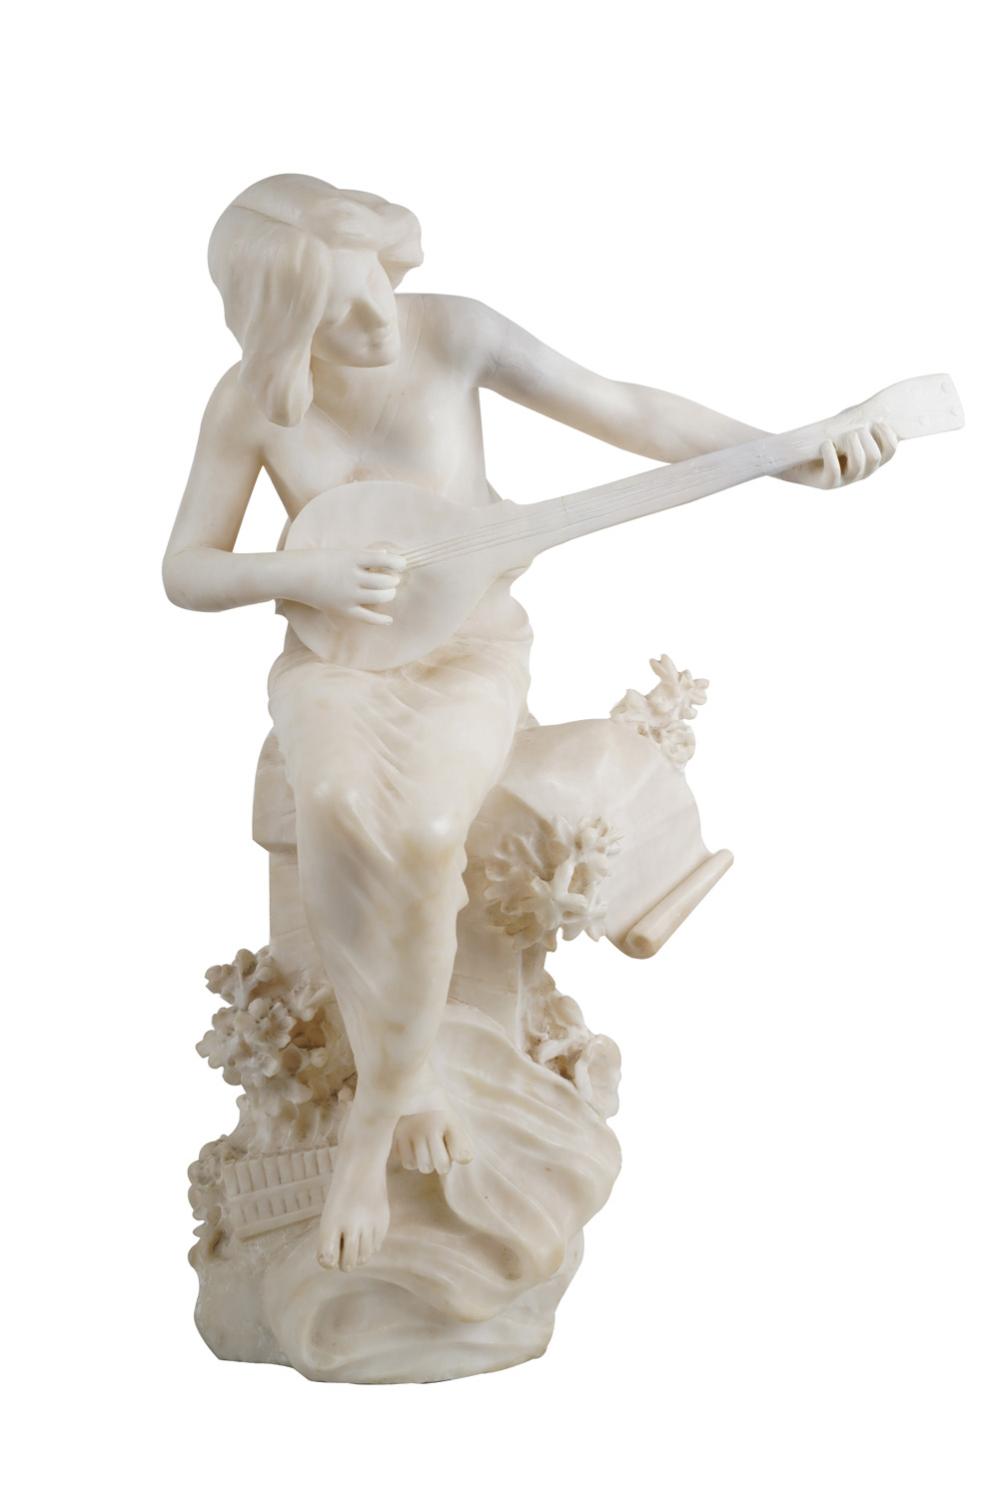 WOMAN WITH A MANDOLINalabaster figure